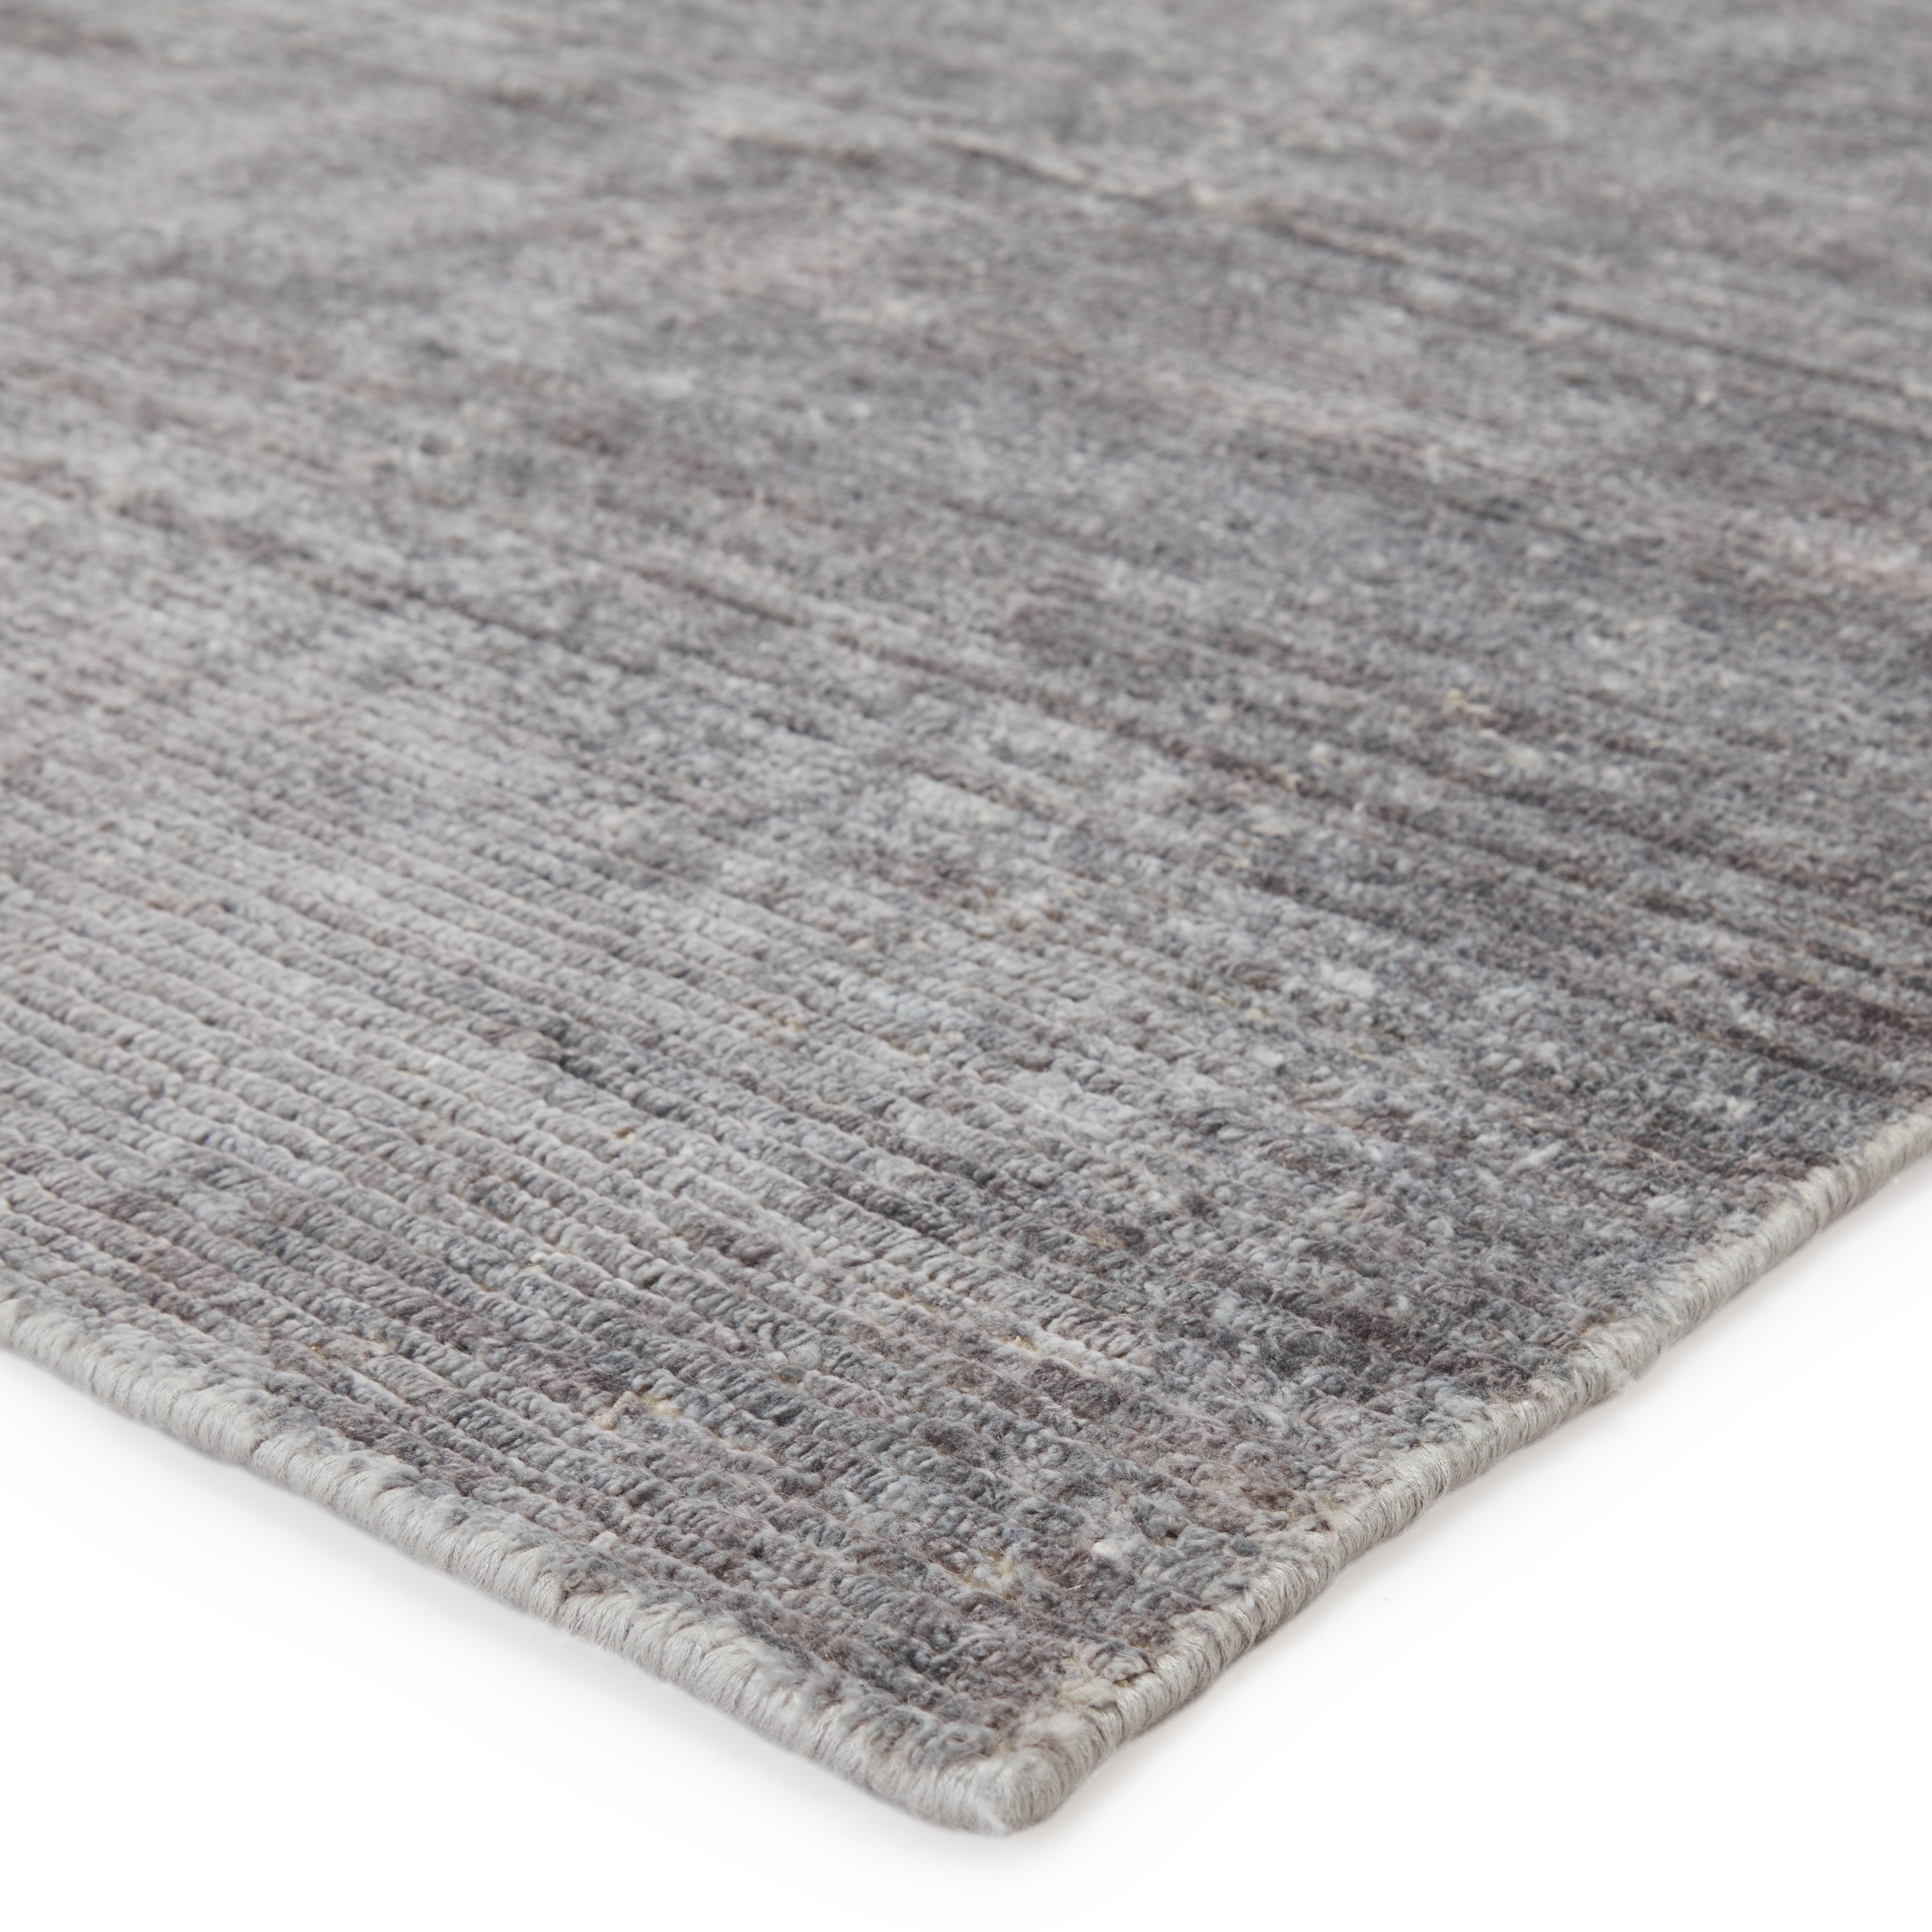 Ardis Handmade Solid Silver/ White Area Rug (9'X12') - Image 1